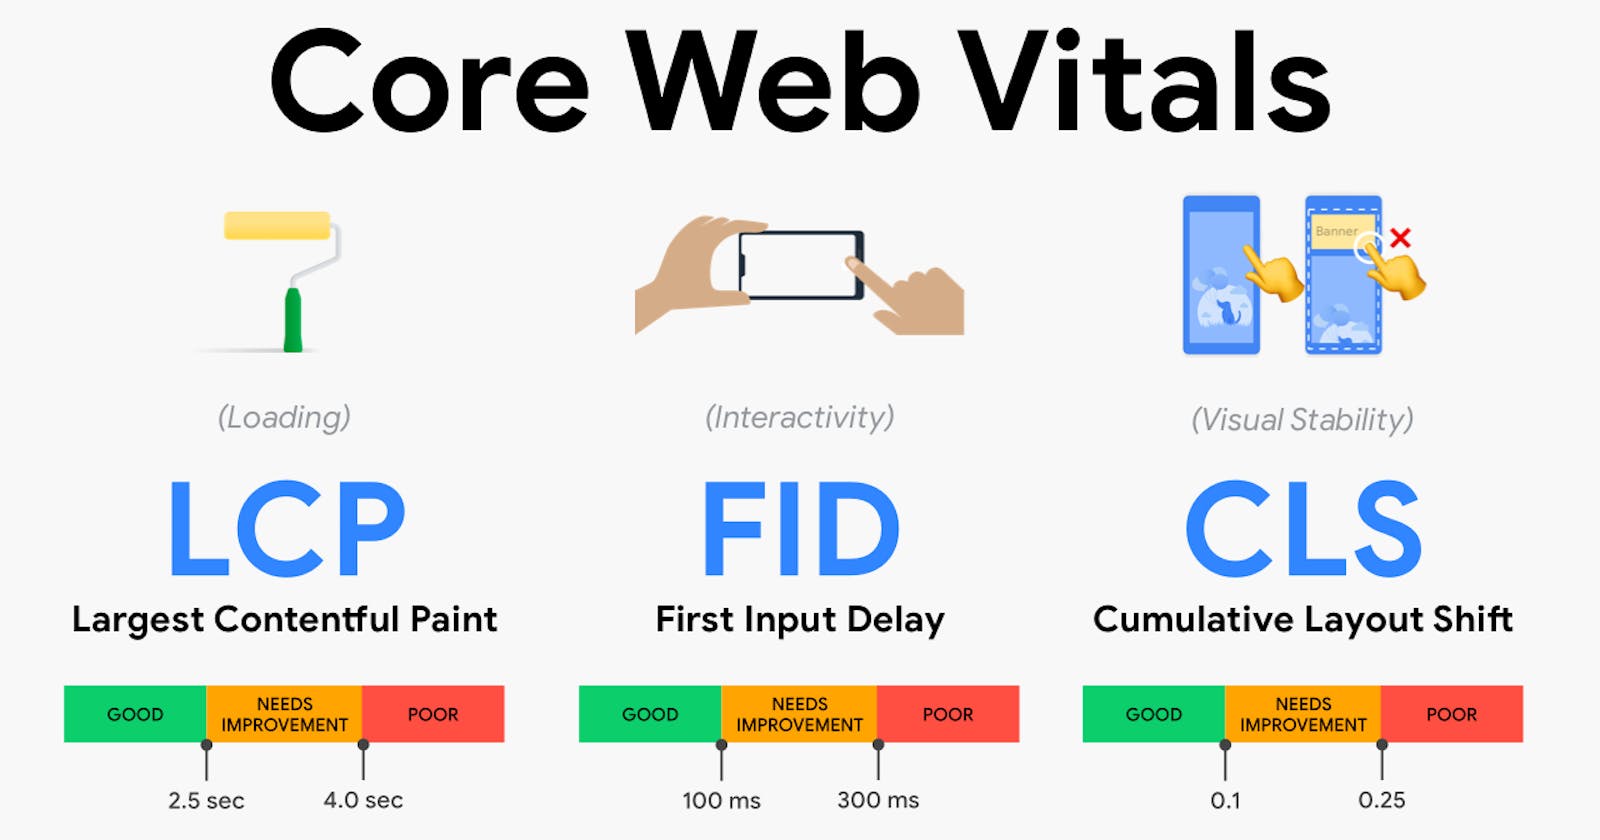 How to Test and Improve Core Web Vitals for WordPress?